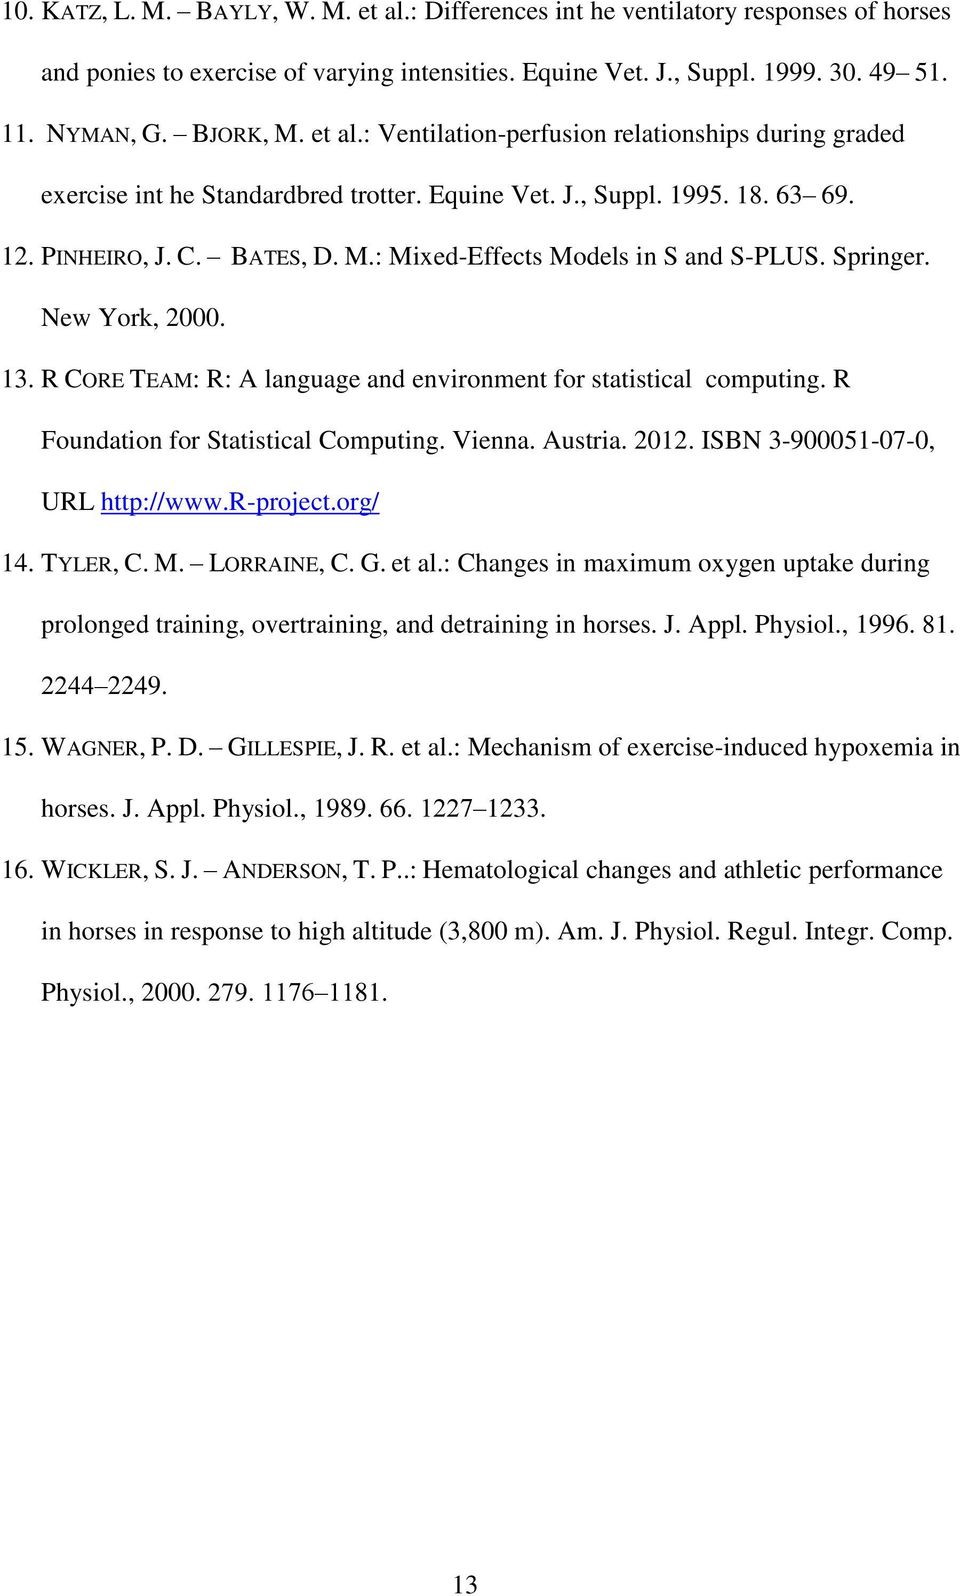 : Mixed-Effects Models in S and S-PLUS. Springer. New York, 2000. 13. R CORE TEAM: R: A language and environment for statistical computing. R Foundation for Statistical Computing. Vienna. Austria.